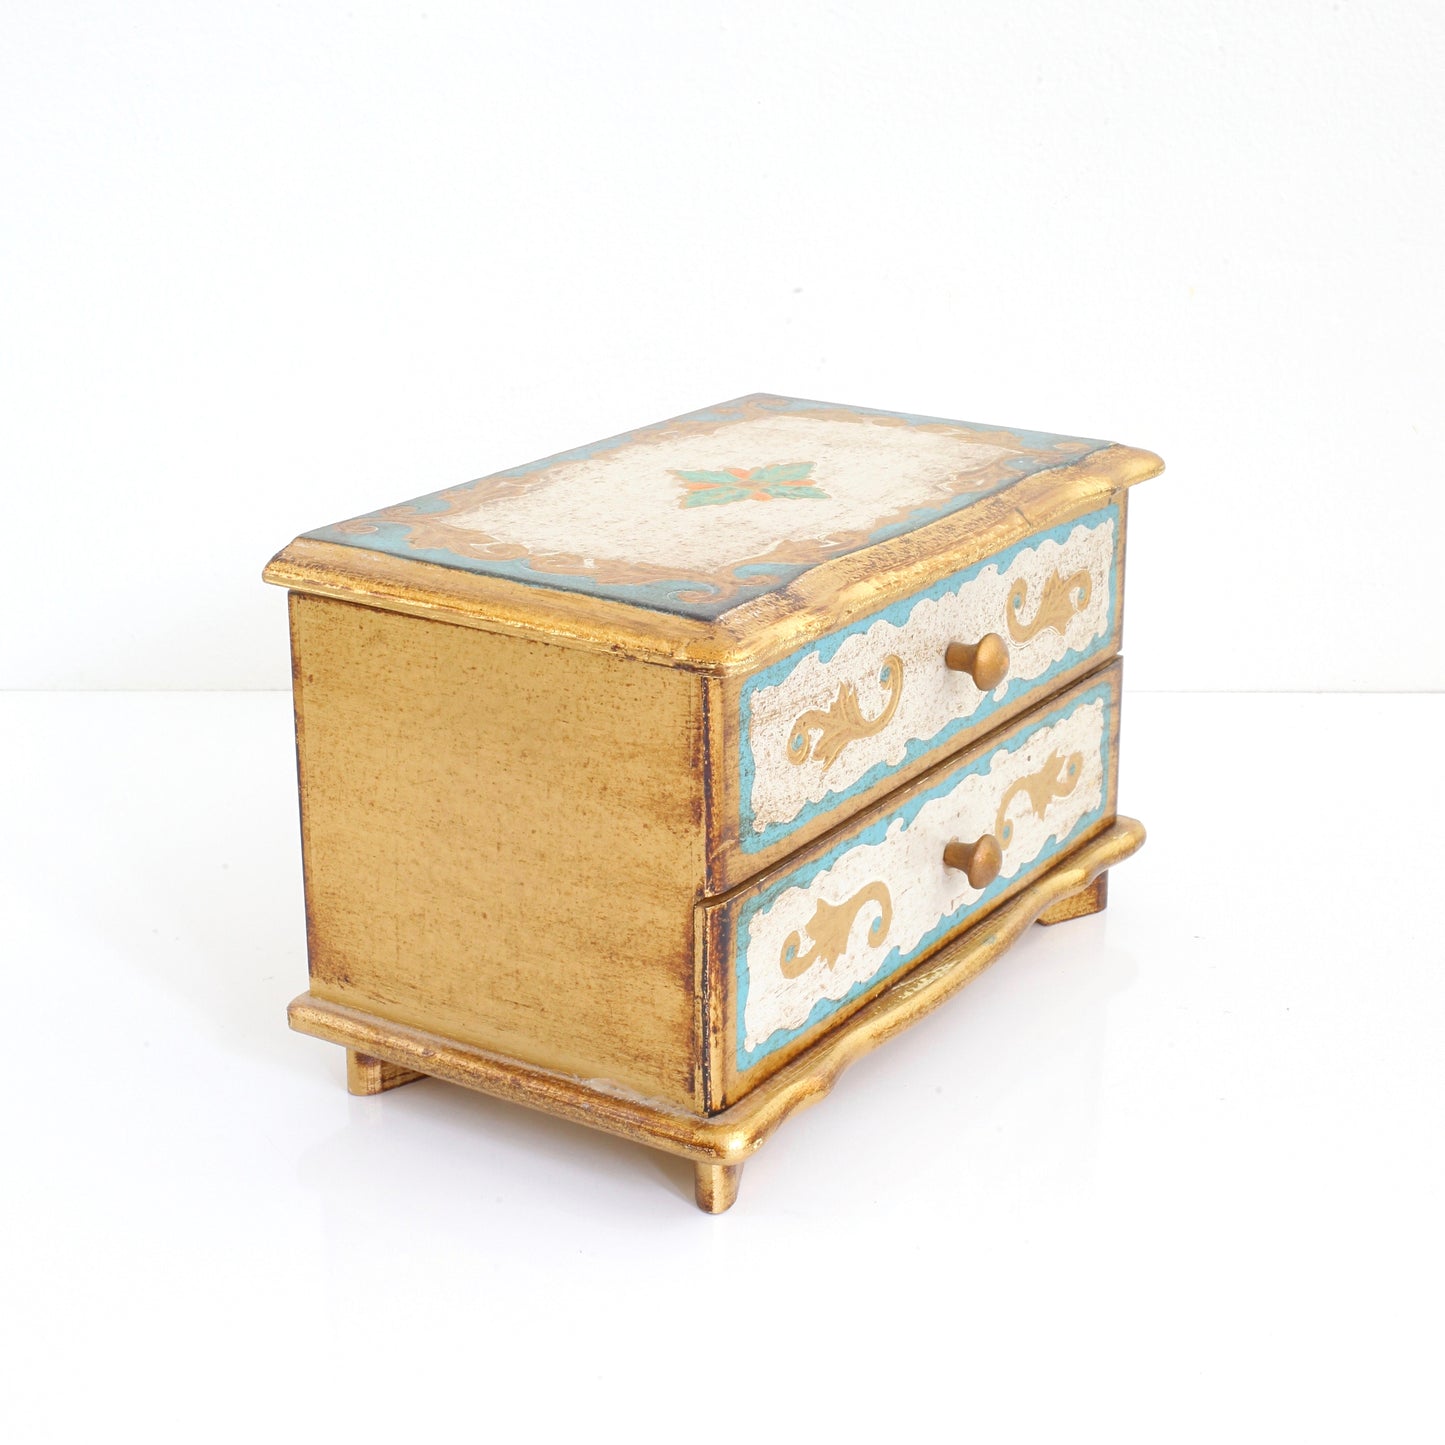 SOLD - Vintage Musical Florentine Jewelry Box in Aqua & Gold